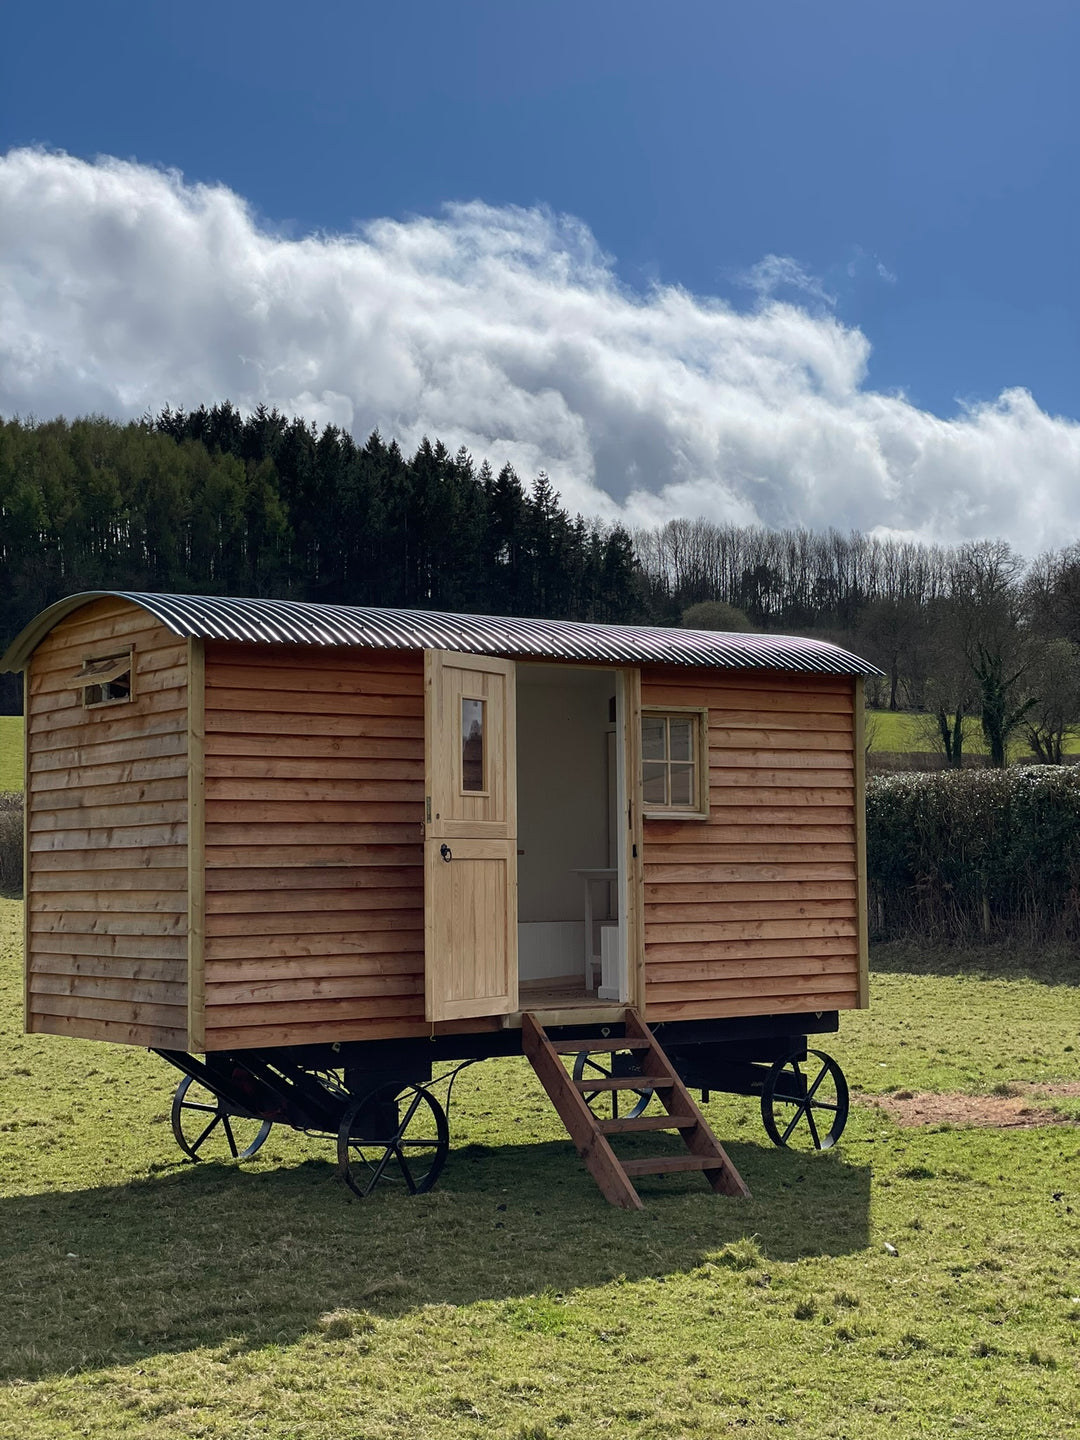 One Night stay in the Woodee Shepherds Hut - cooked breakfast included!